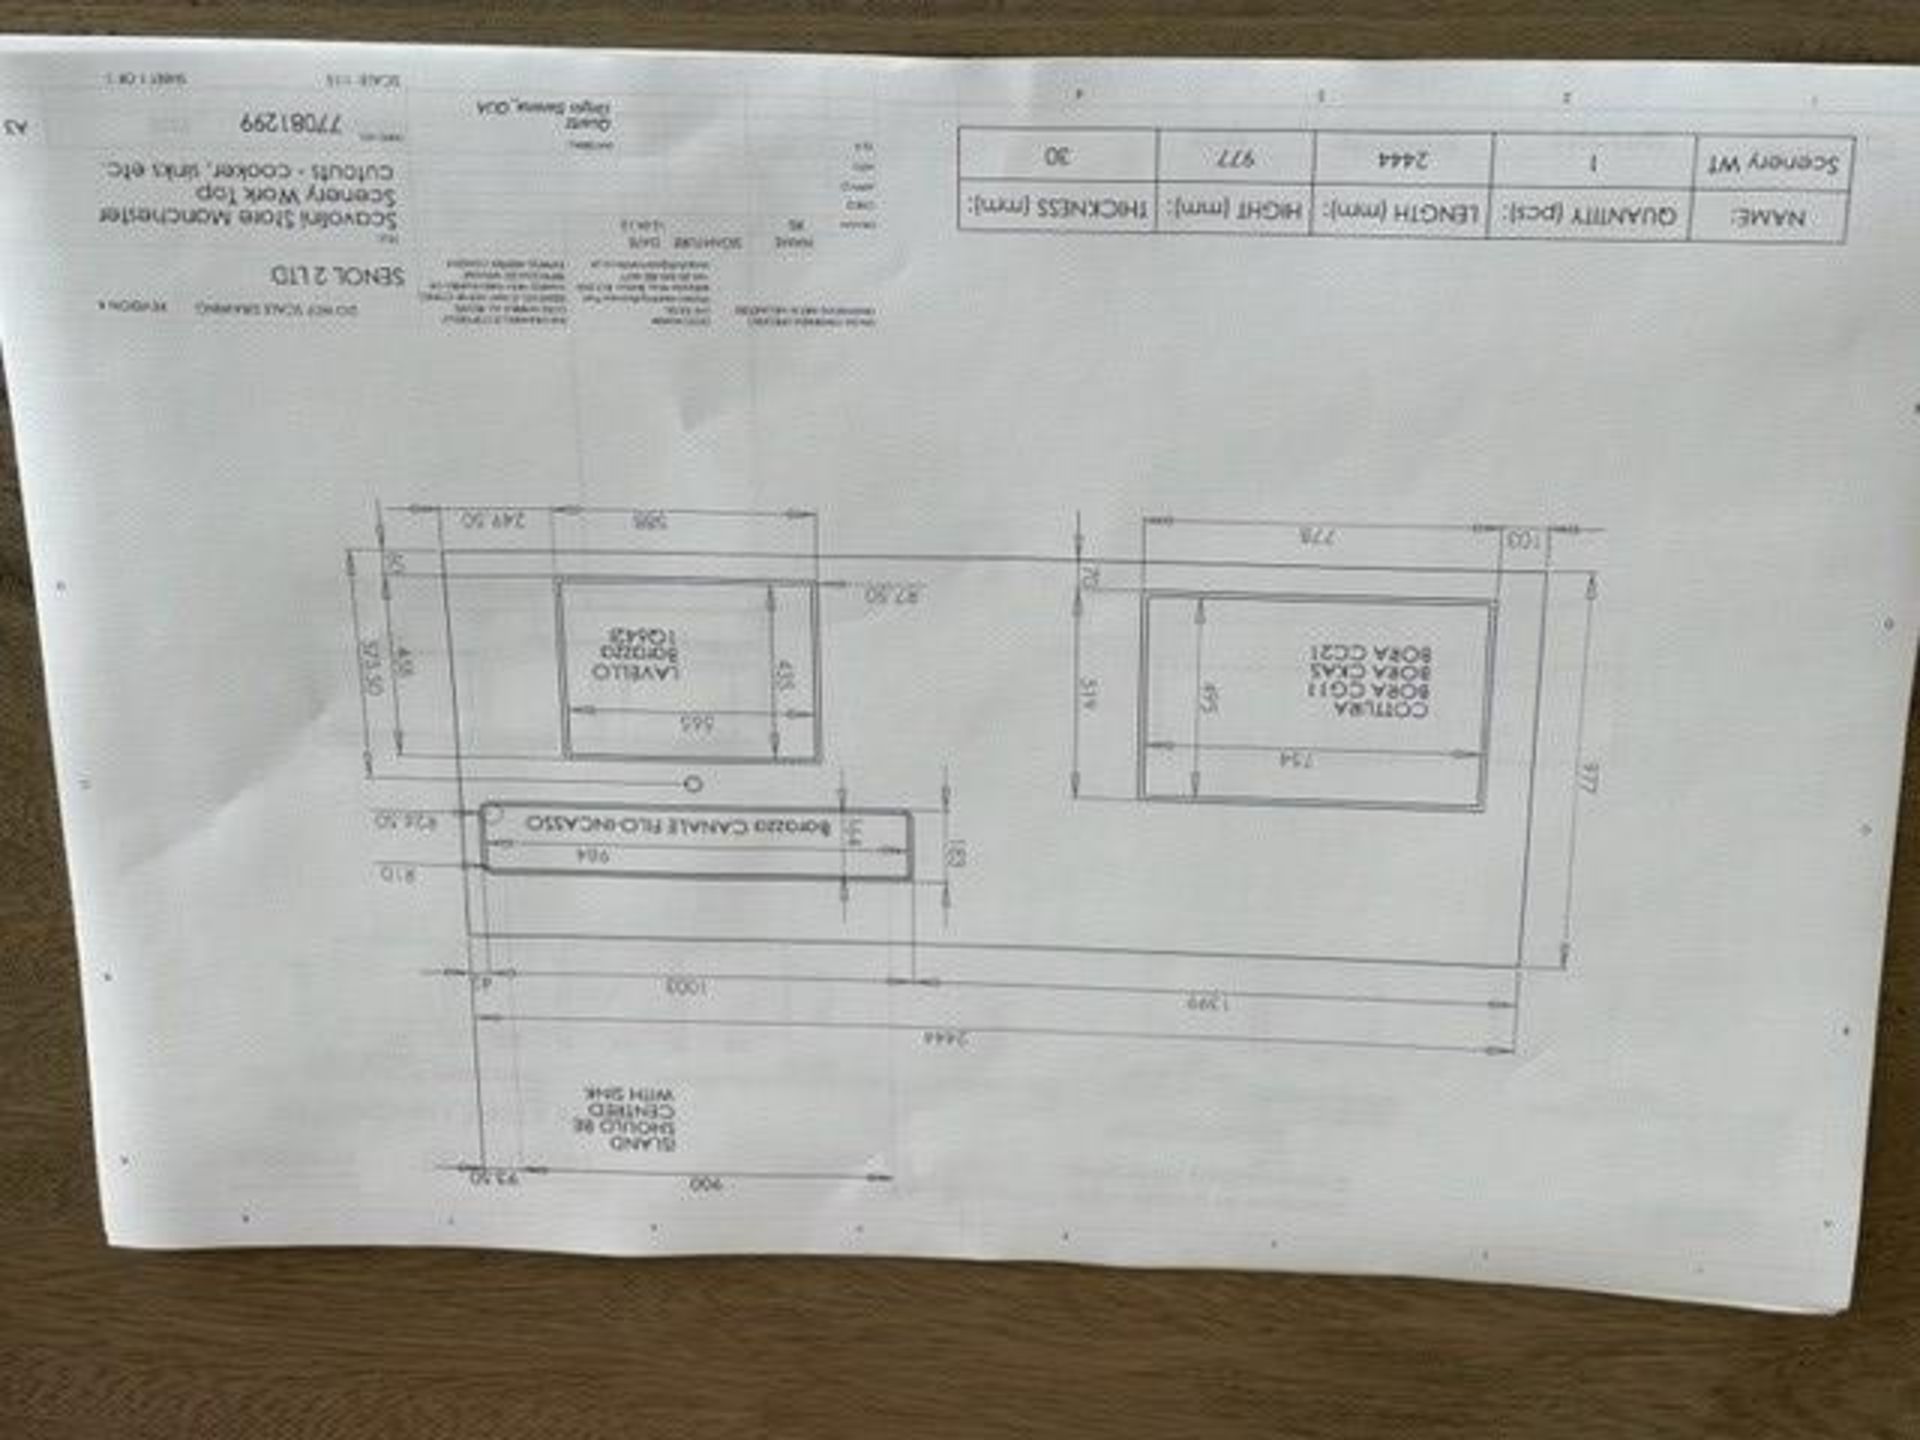 This is KITCHEN NO 2. SCAVOLINI SCENERY Please see images and plan for number and size of the - Image 7 of 9